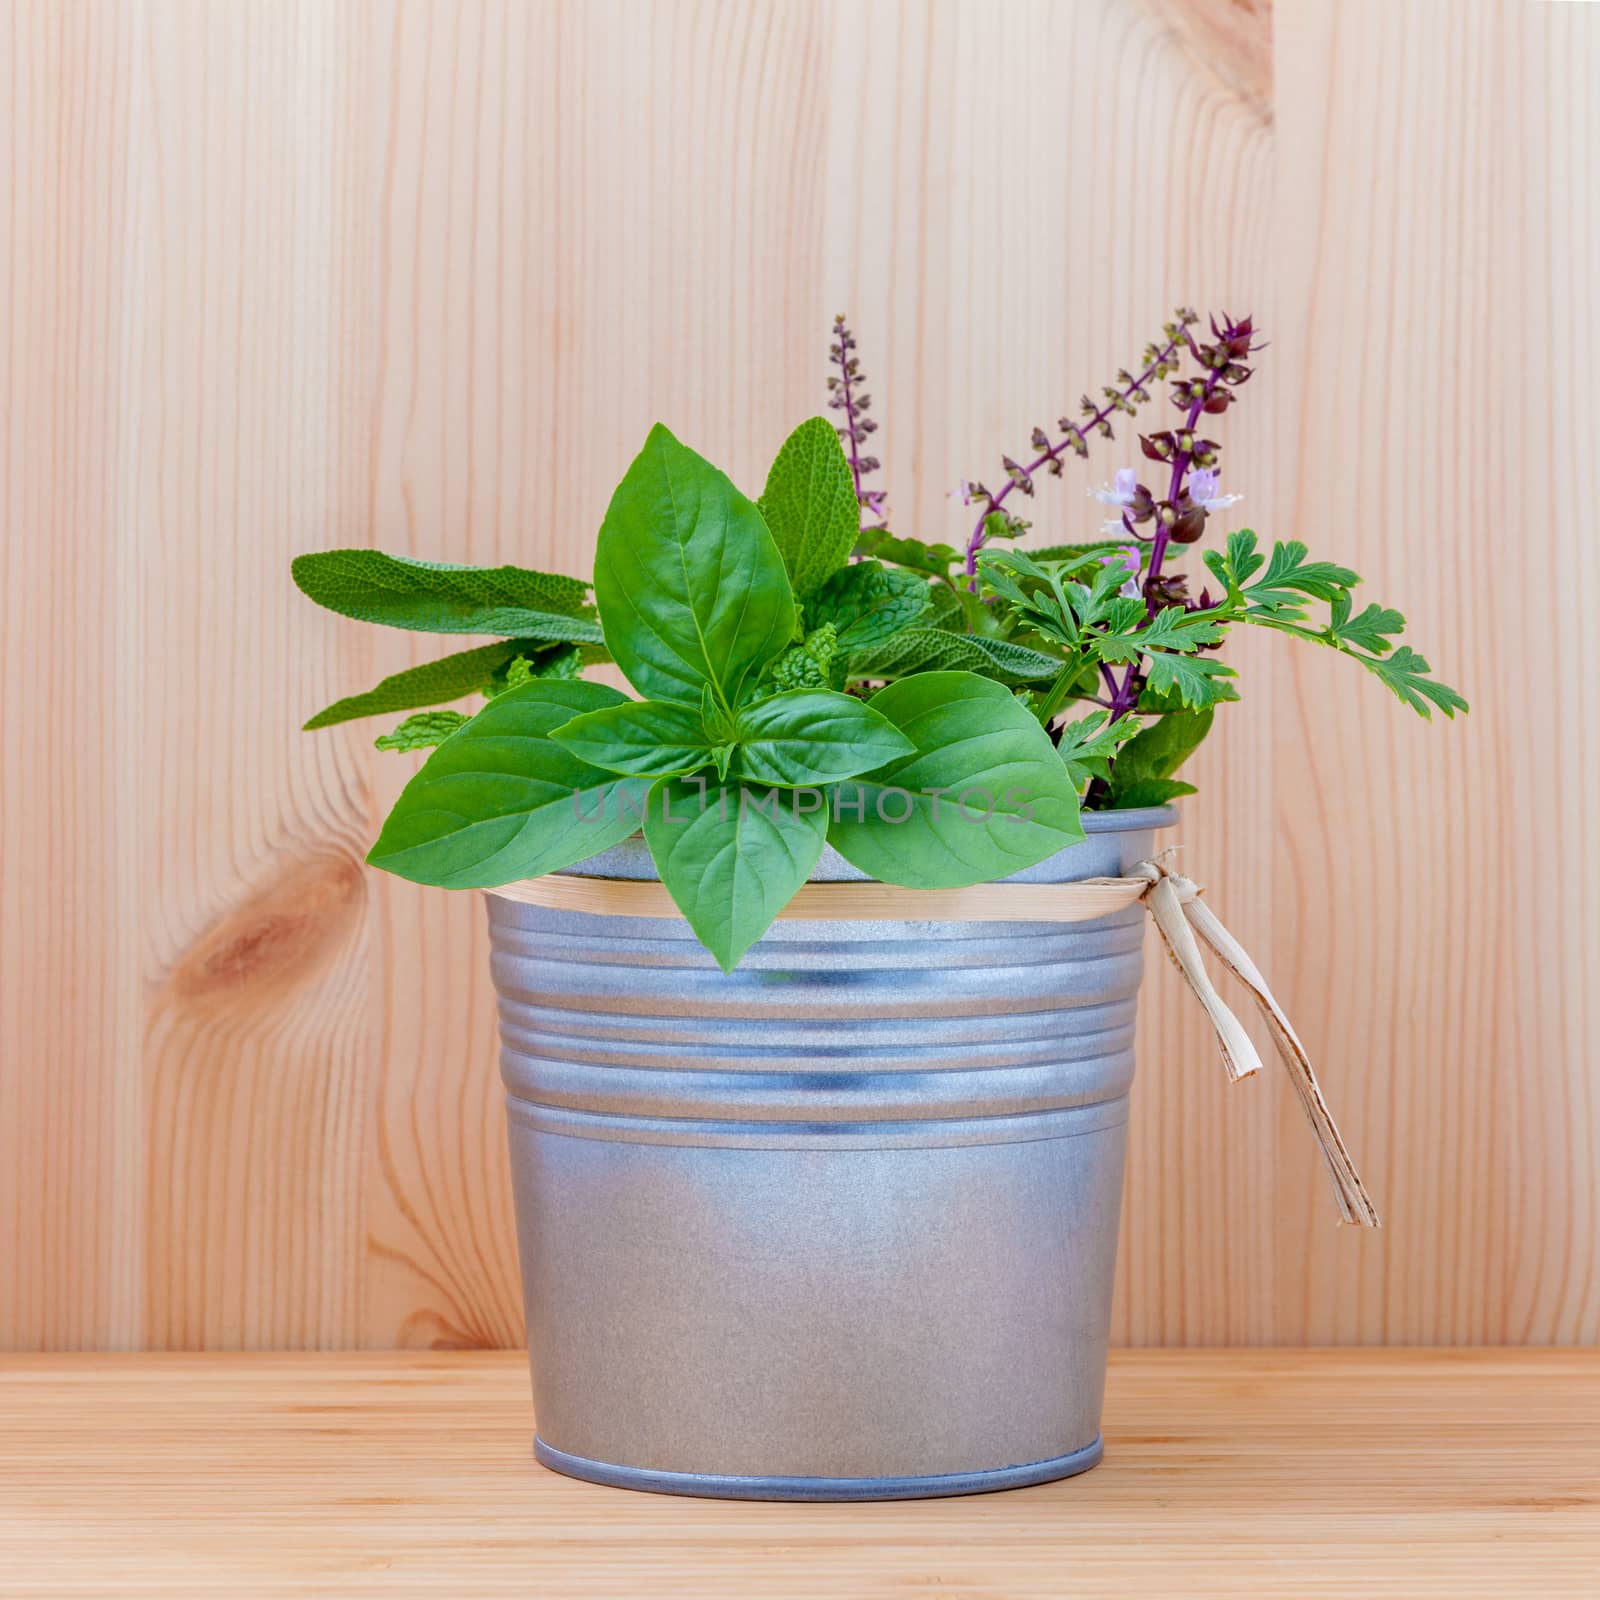 The fresh herbs from the garden set up in metal pot on white wooden background.